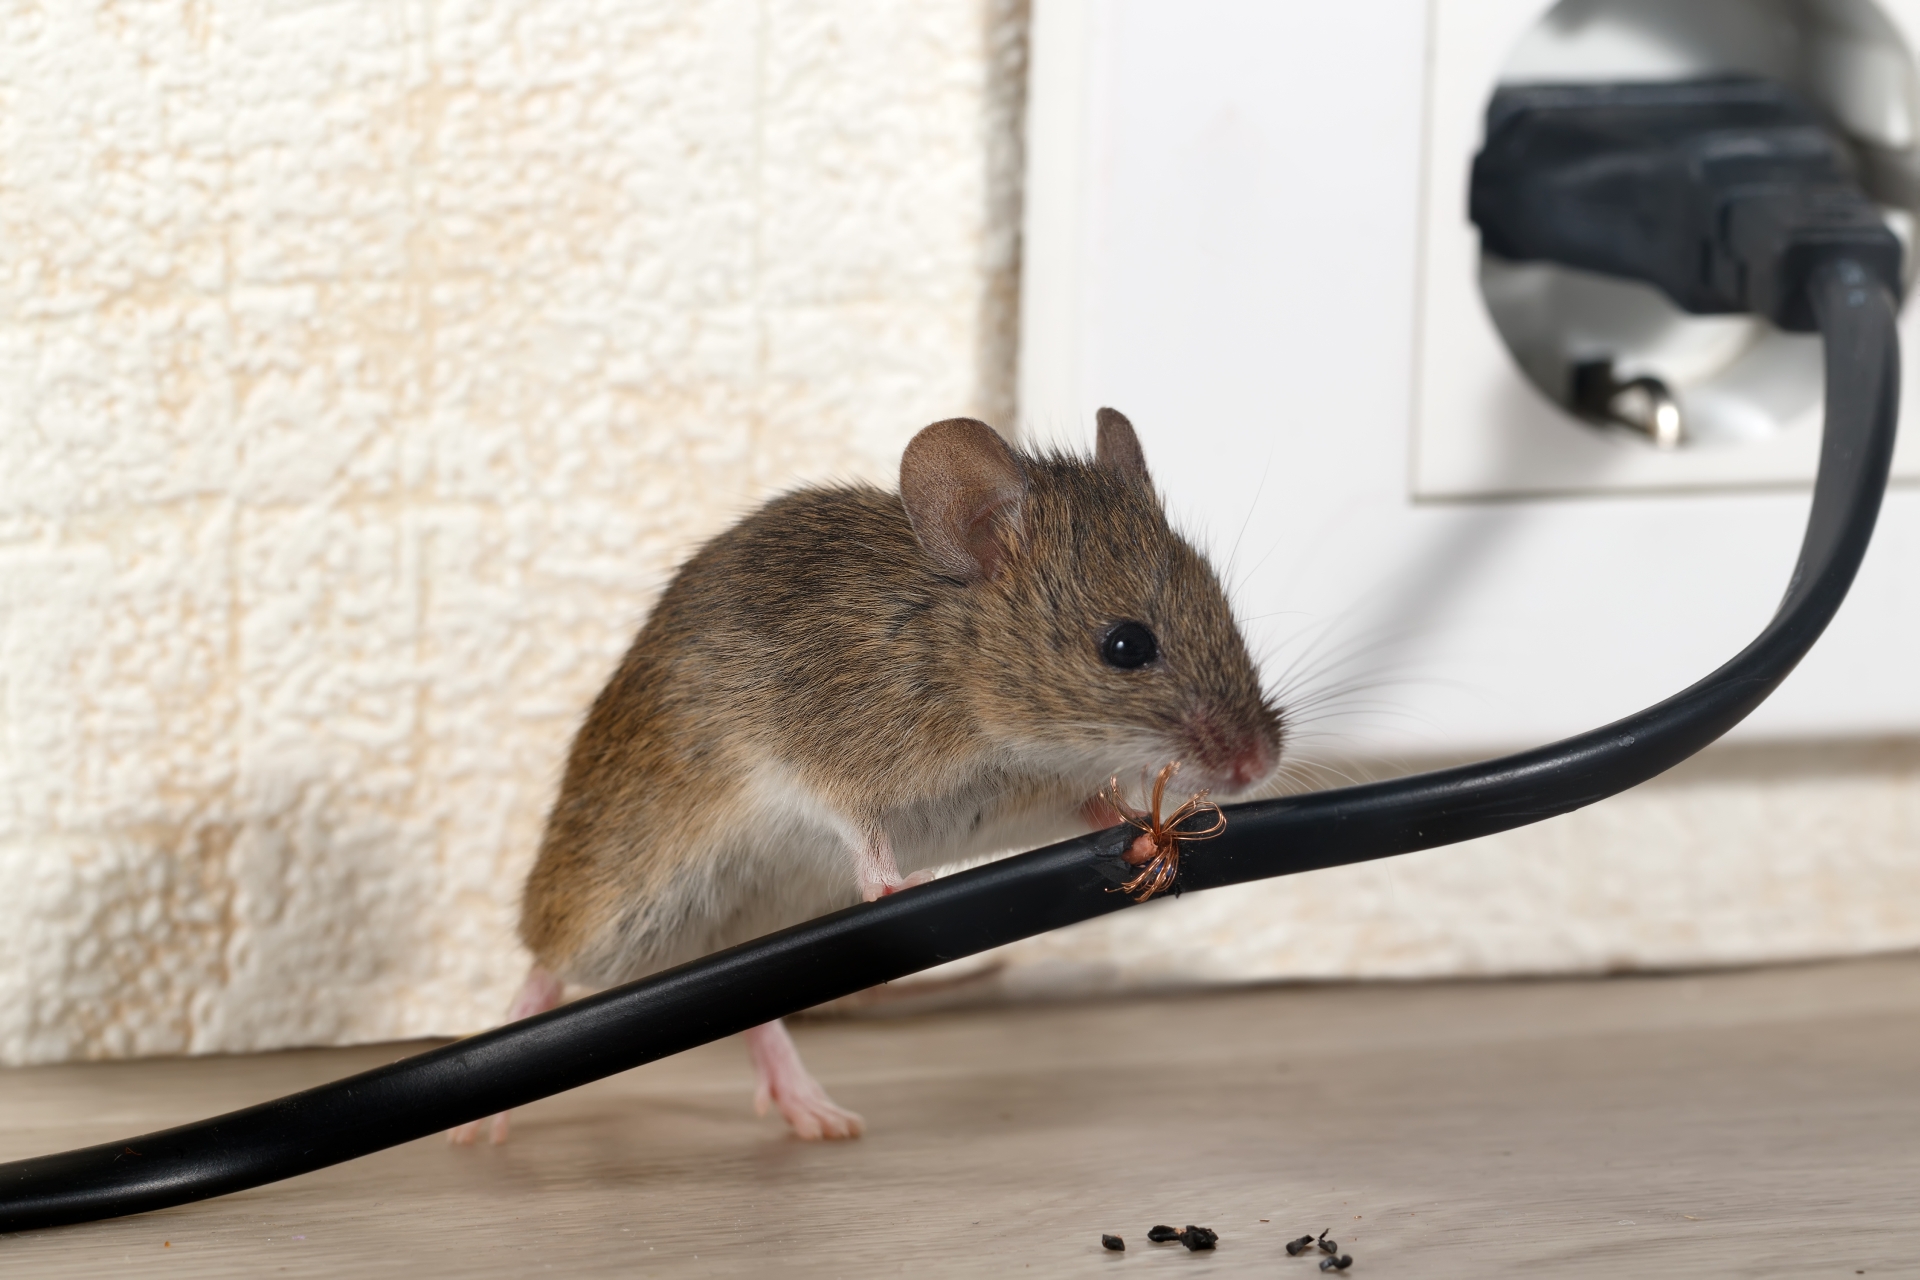 Mice Infestation, Pest Control in Buckhurst Hill, IG9. Call Now 020 8166 9746